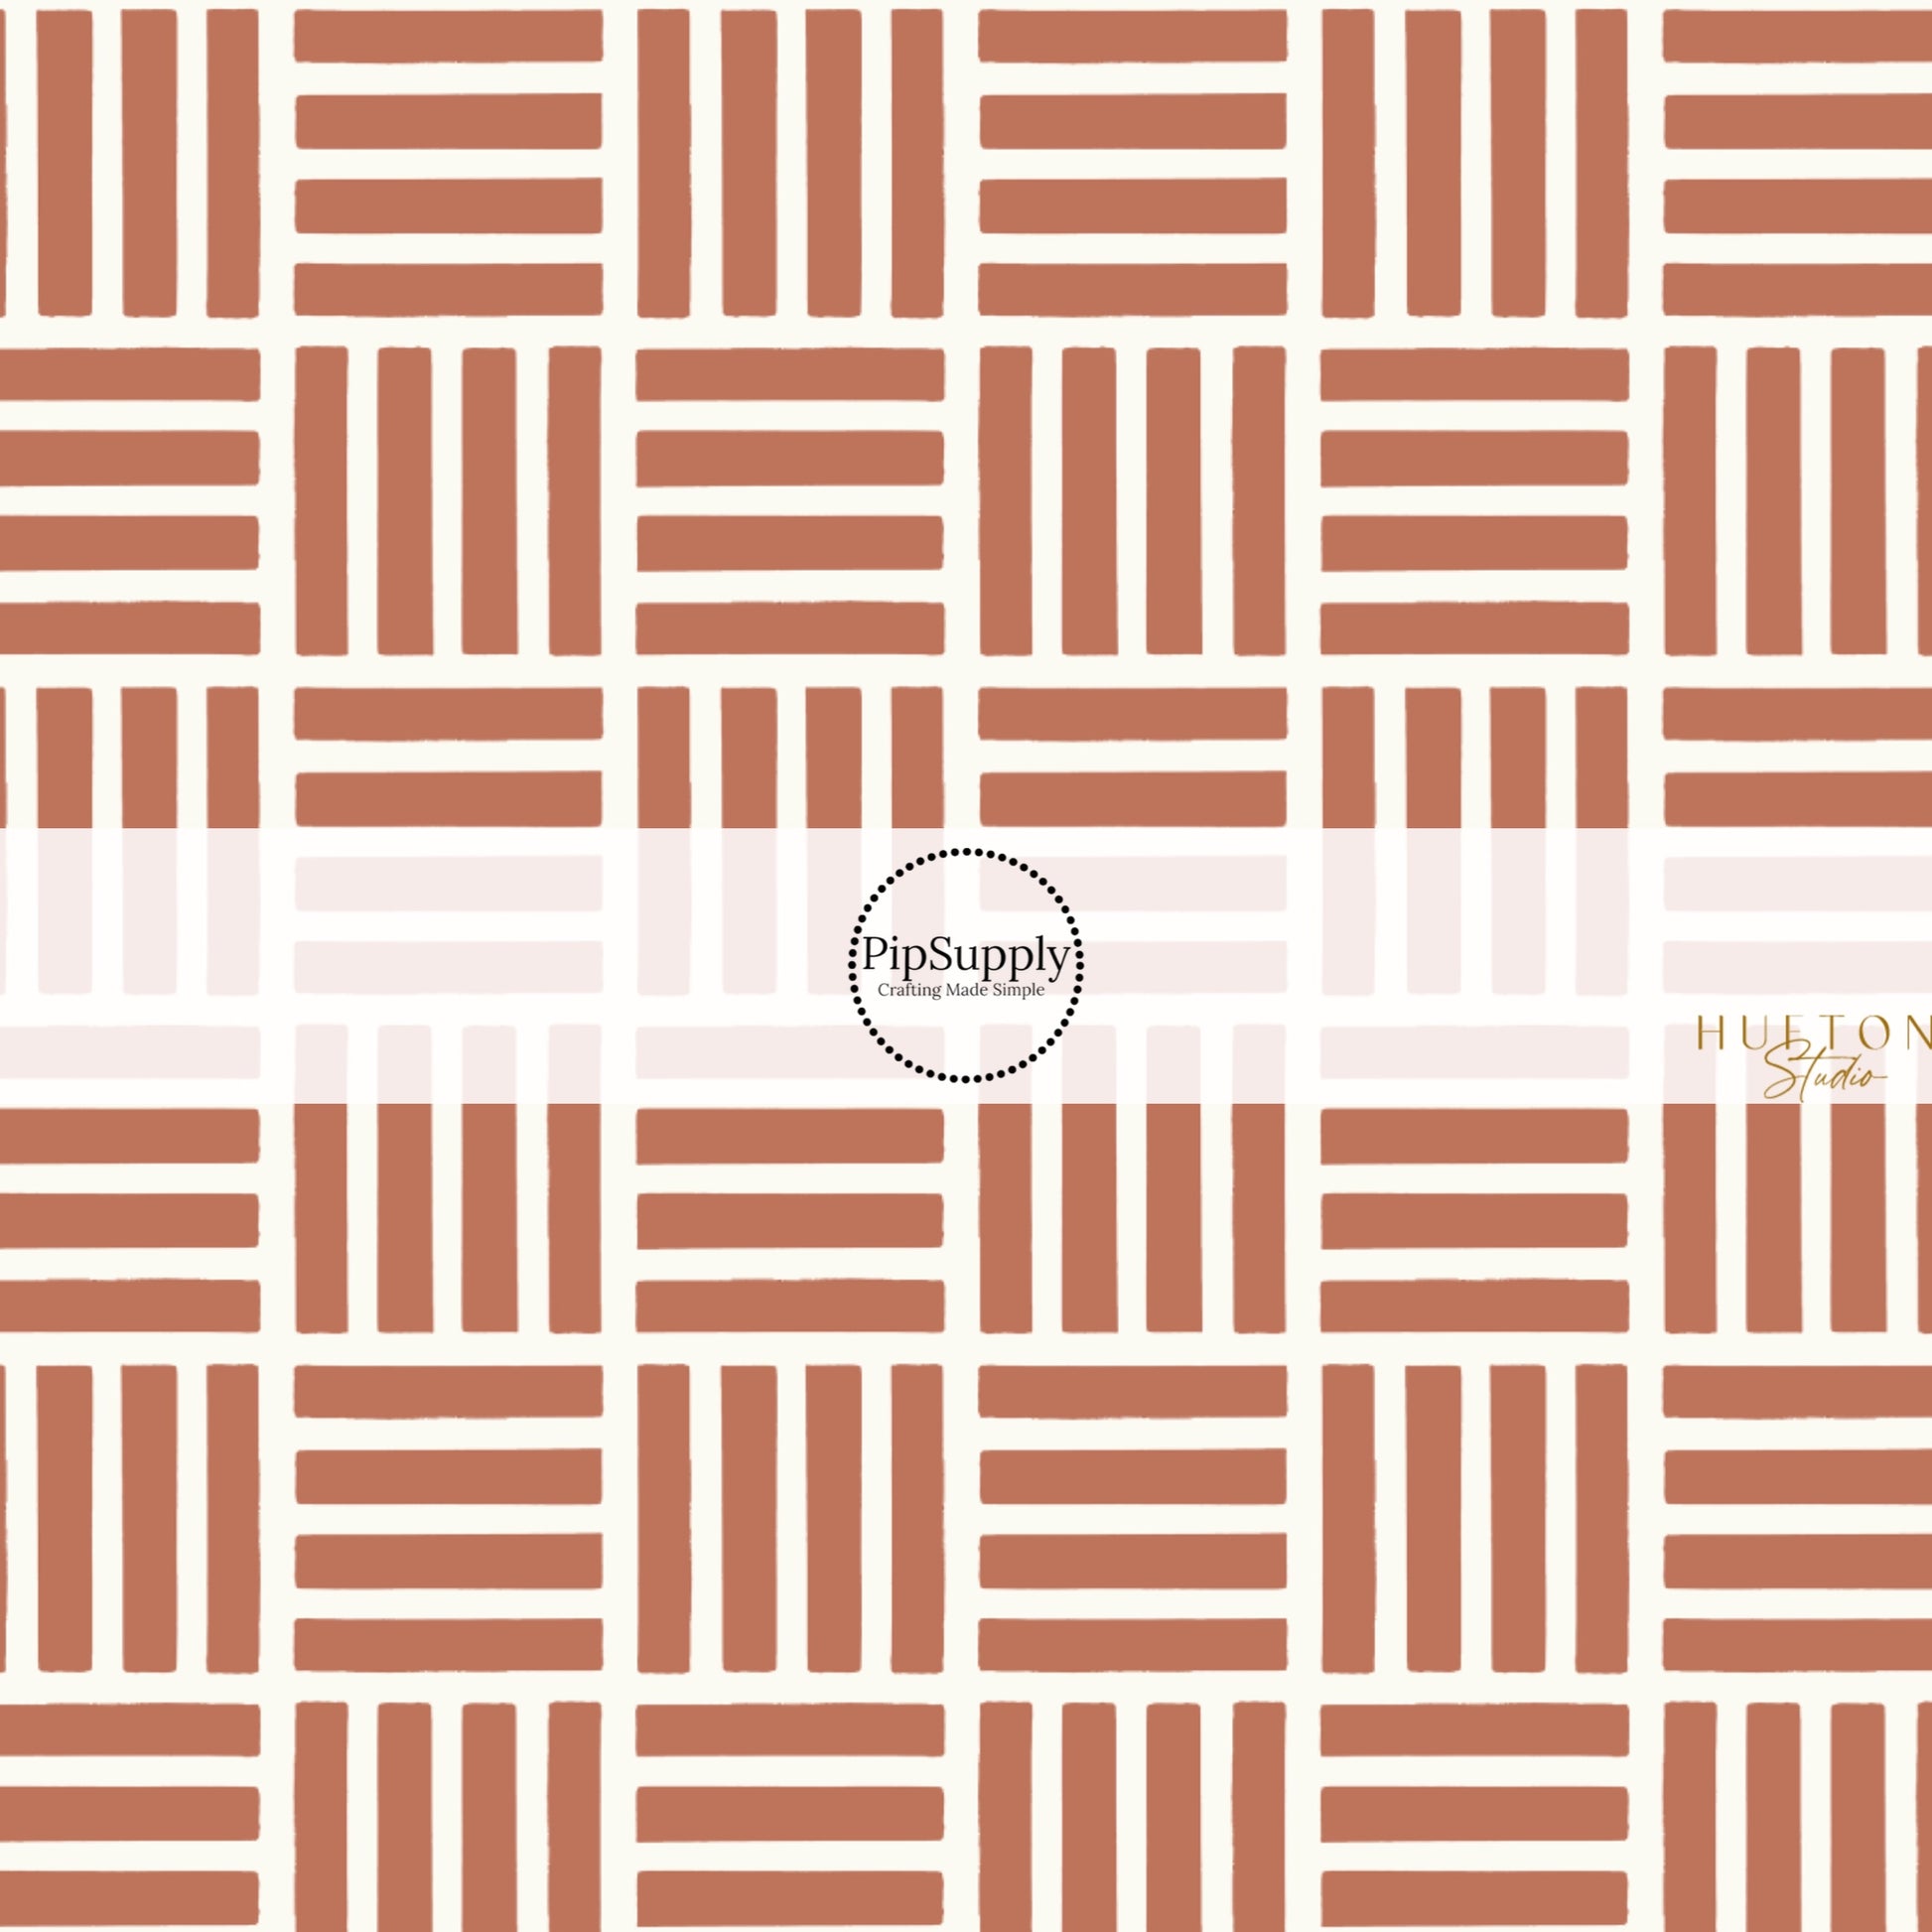 This summer fabric by the yard features brown and white groove patterns. This fun themed fabric can be used for all your sewing and crafting needs!